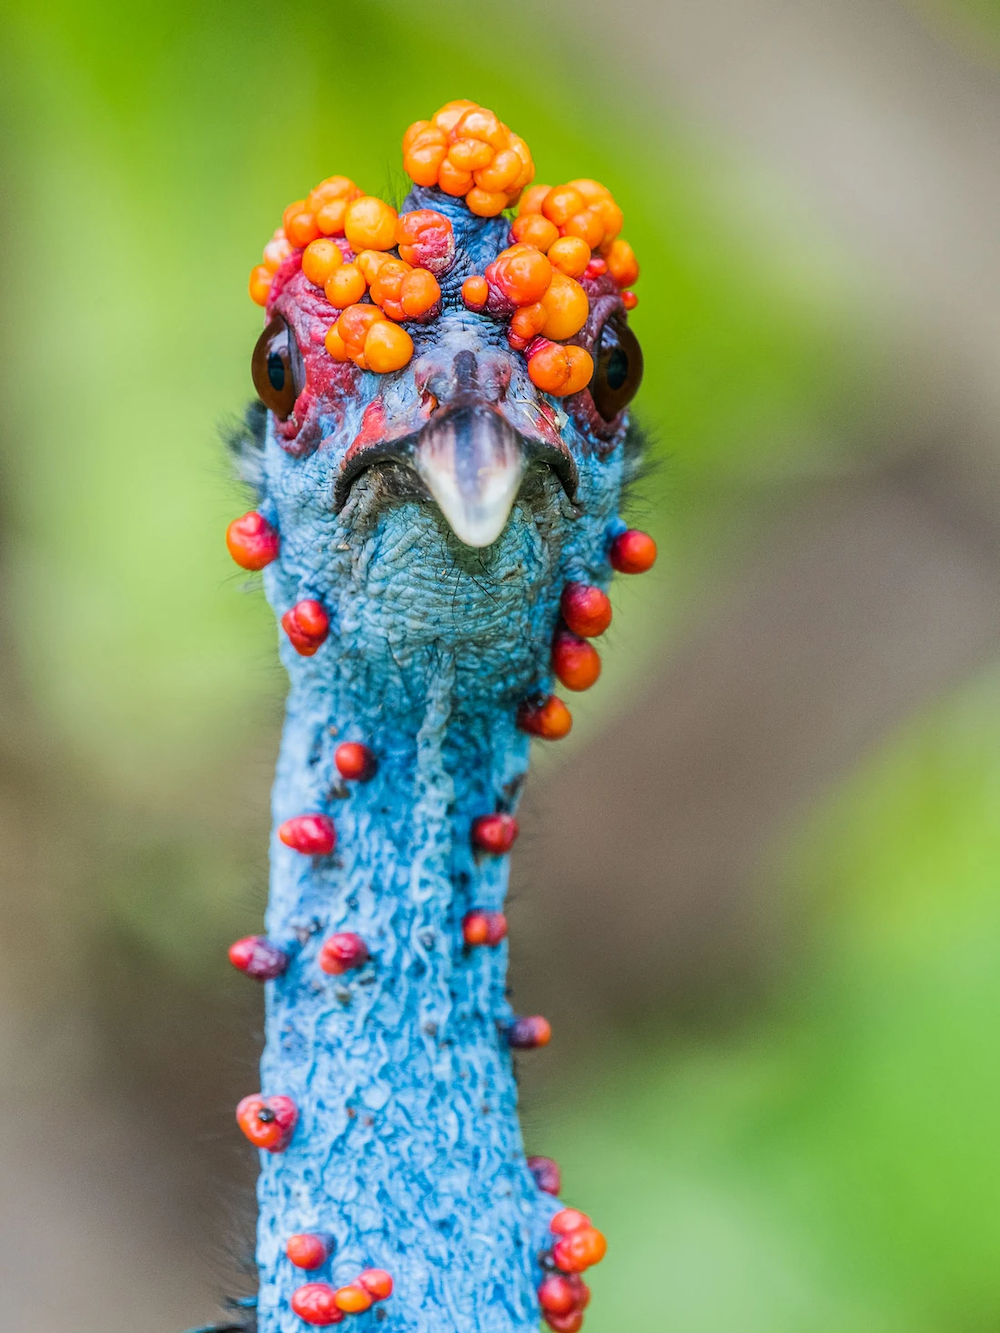 Ocellated Turkey (Meleagris ocellata), Chan Chich Lodge Belize. © Leander Khil/Bird Photographer of the Year